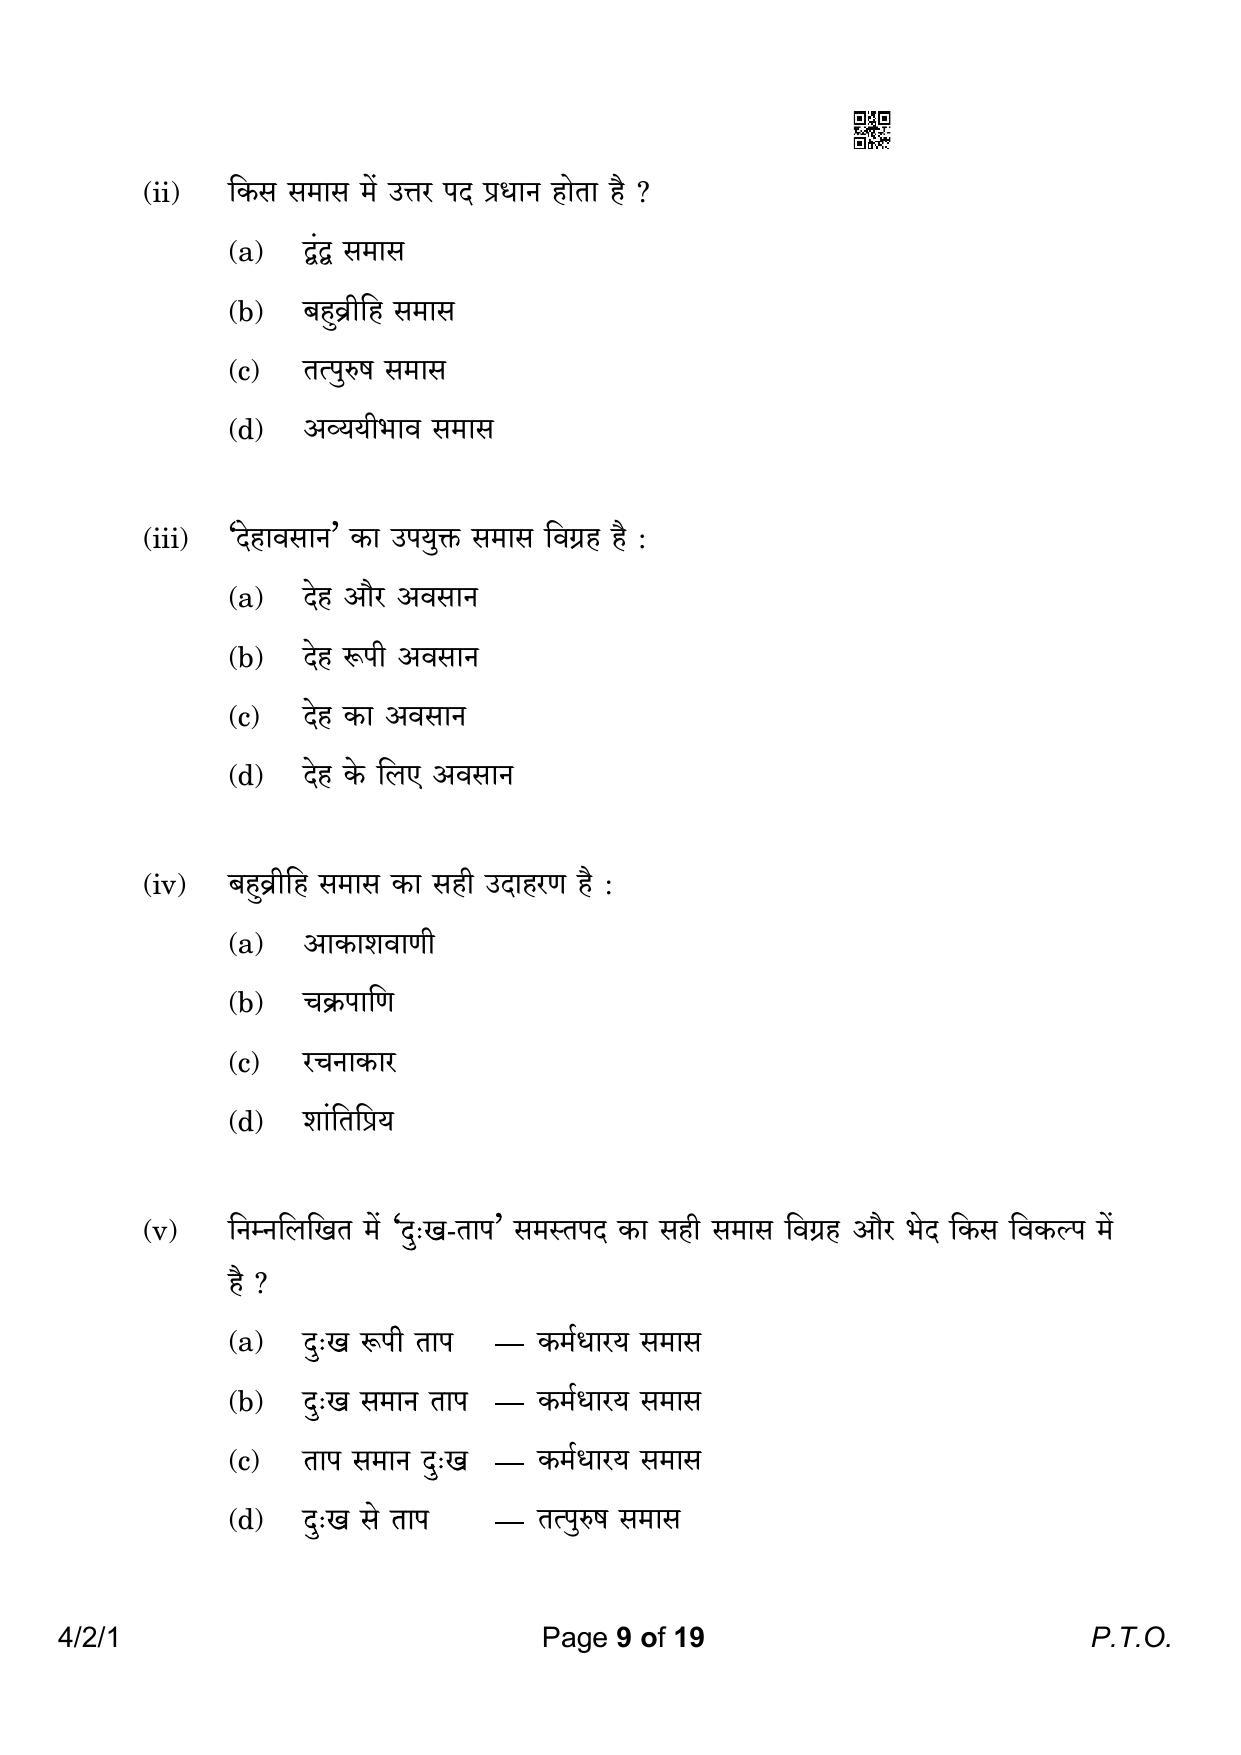 CBSE Class 10 4-2-1 Hindi B 2023 Question Paper - Page 9